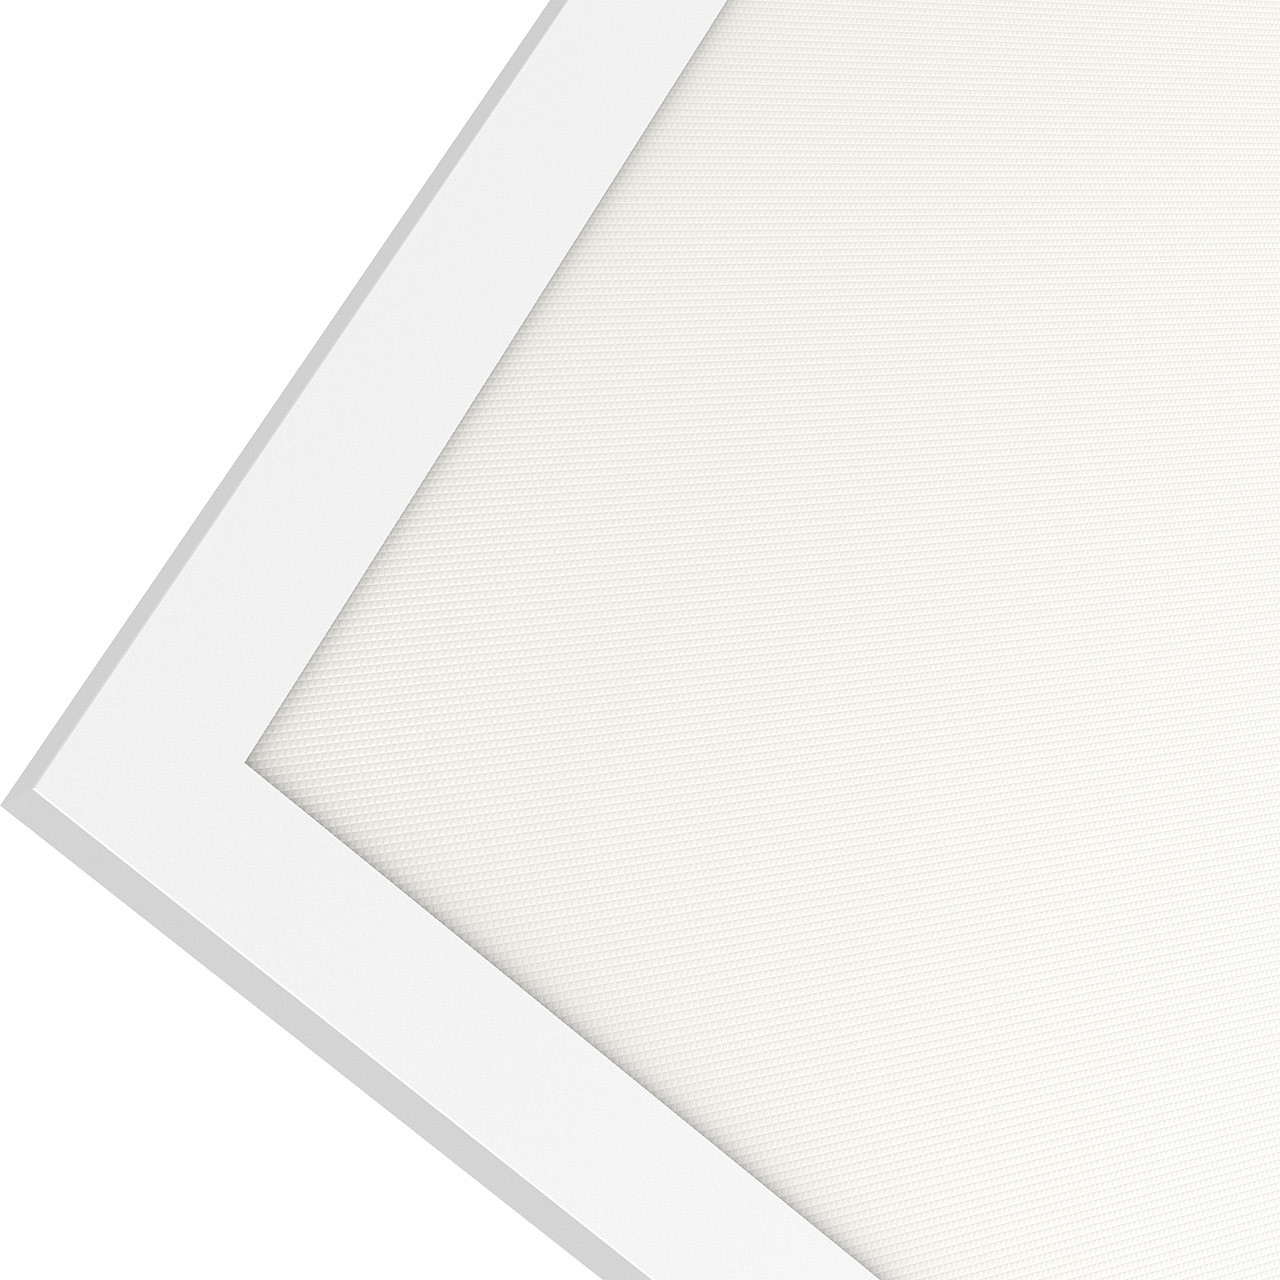 Photos - Floodlight / Street Light Phoebe LED Backlit Ceiling Panel 45W 1200x600 Daylight TP(a) Rated 16743 